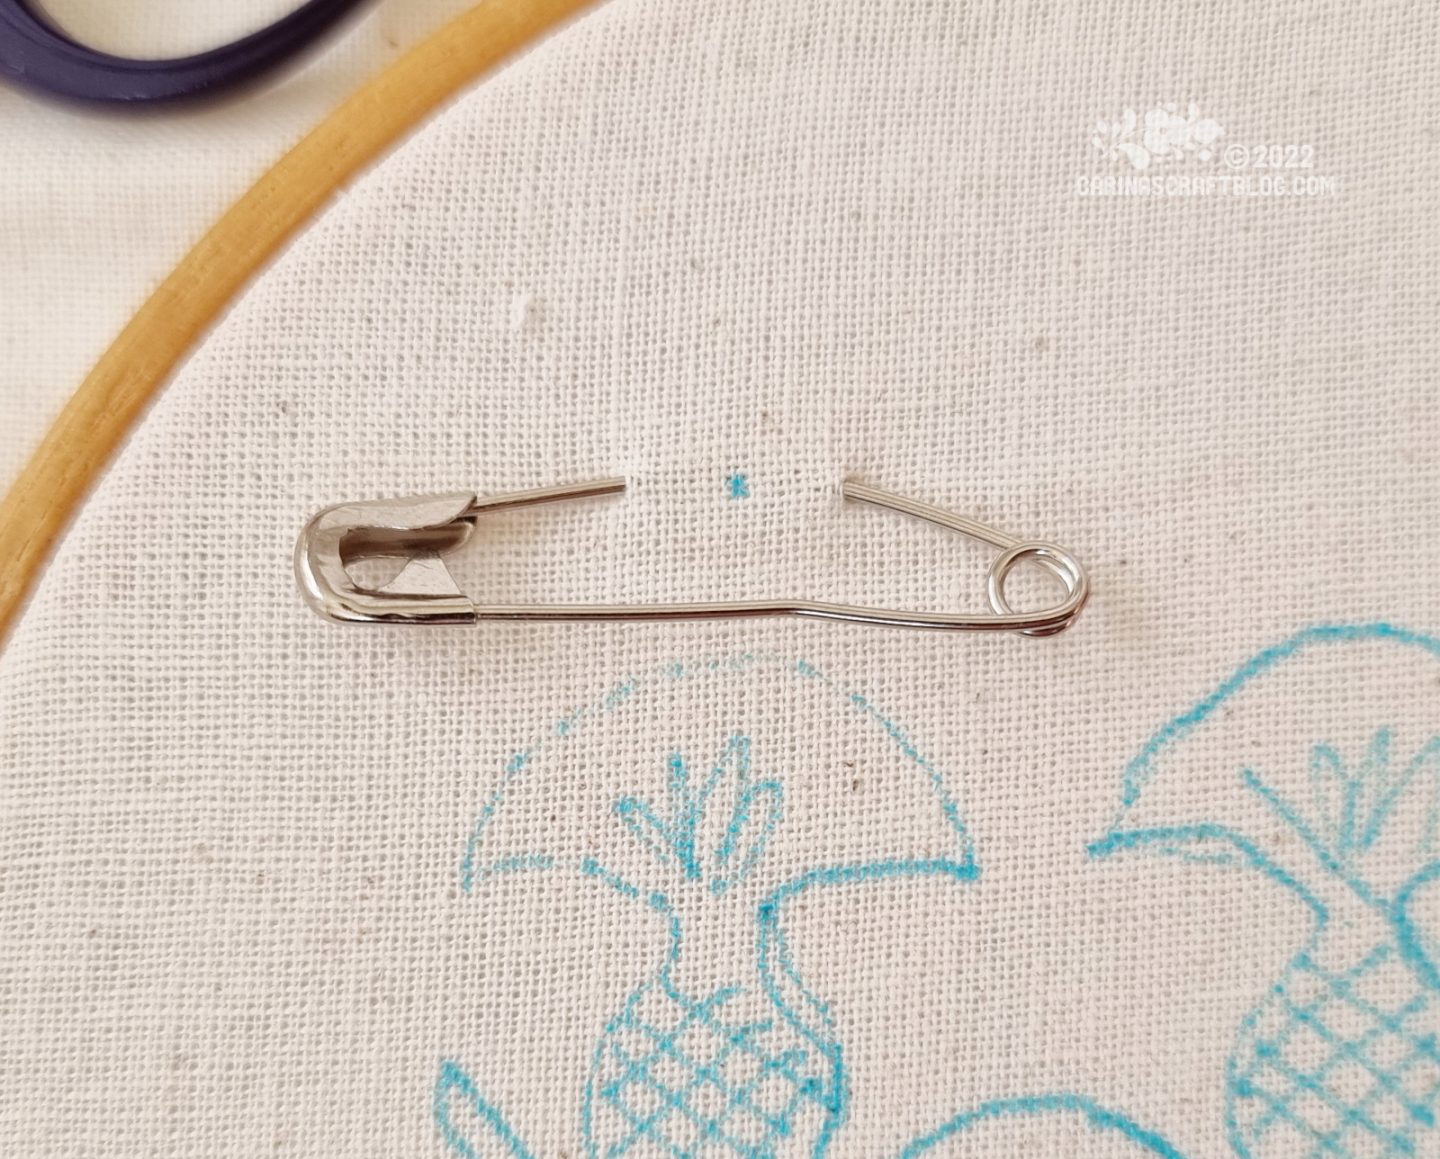 Closeup of a safety pin attached to white fabric in an embroidery hoop.